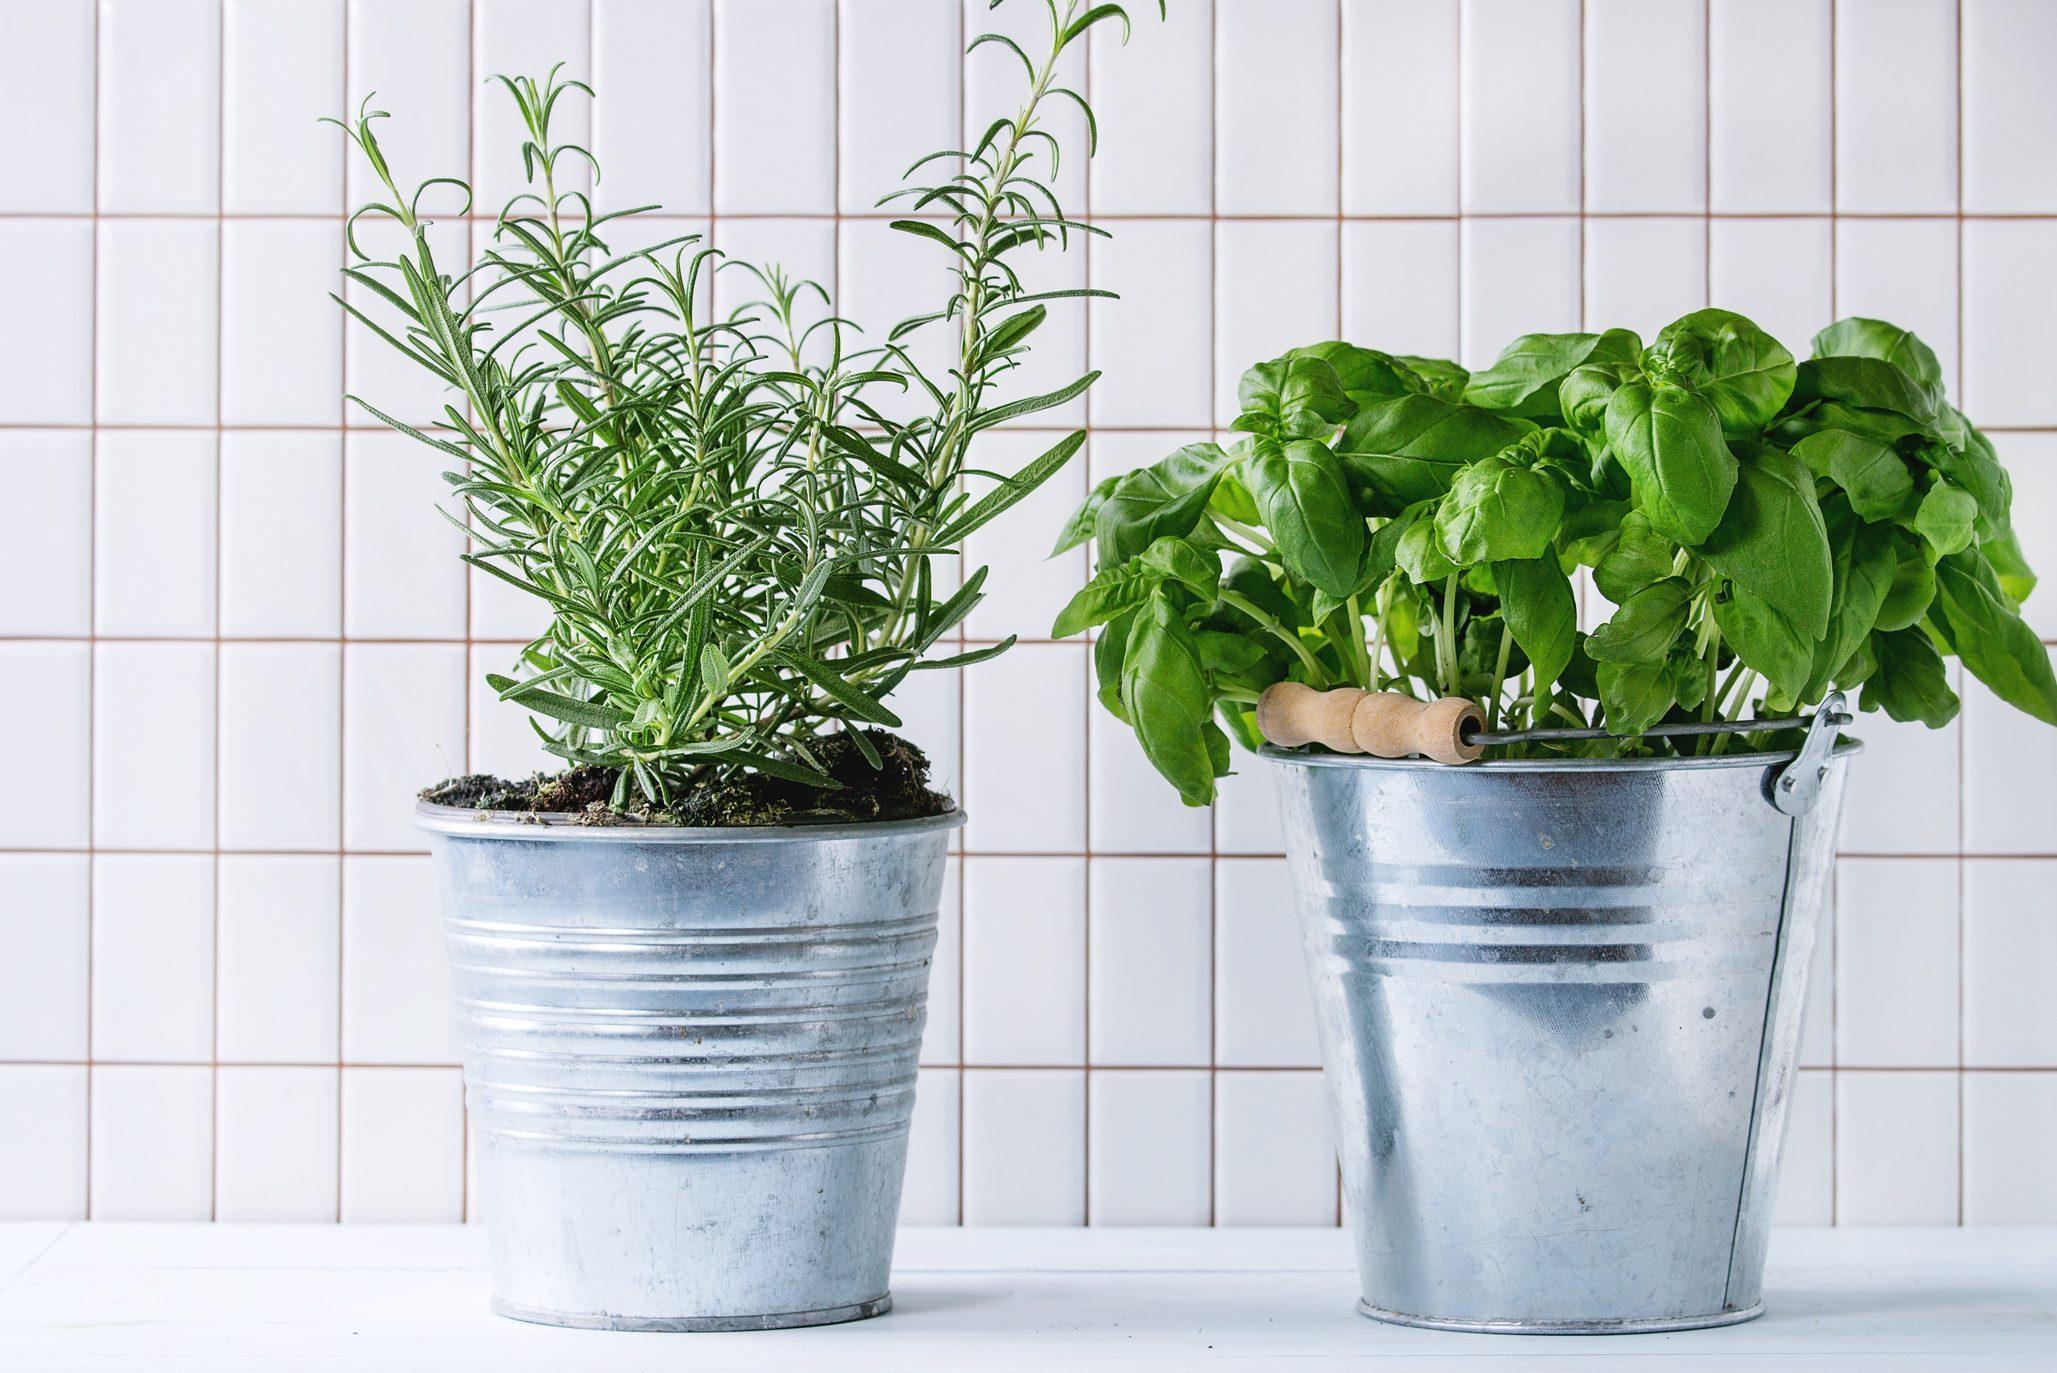 Close-Up Of Potted Plants On Table Against White Tiled Wall